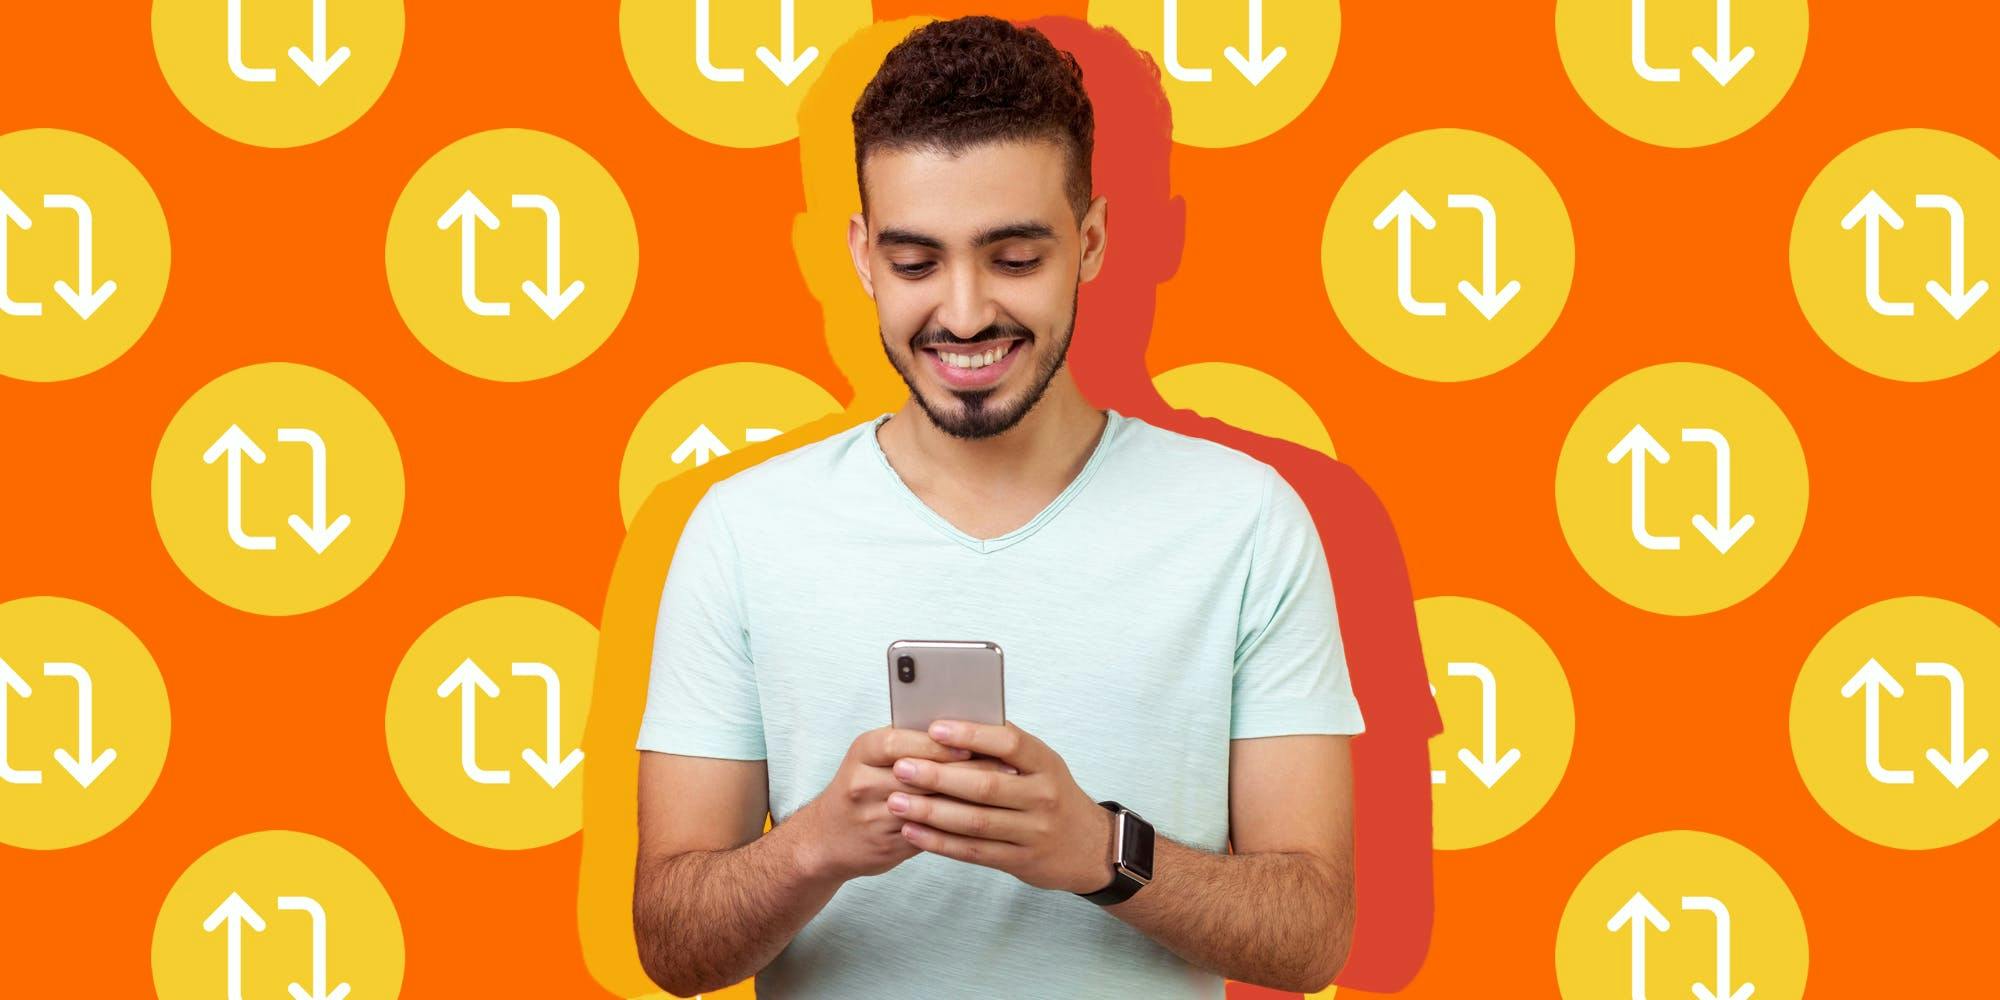 person holding phone in front of orange background with TikTok repost logo pattern background